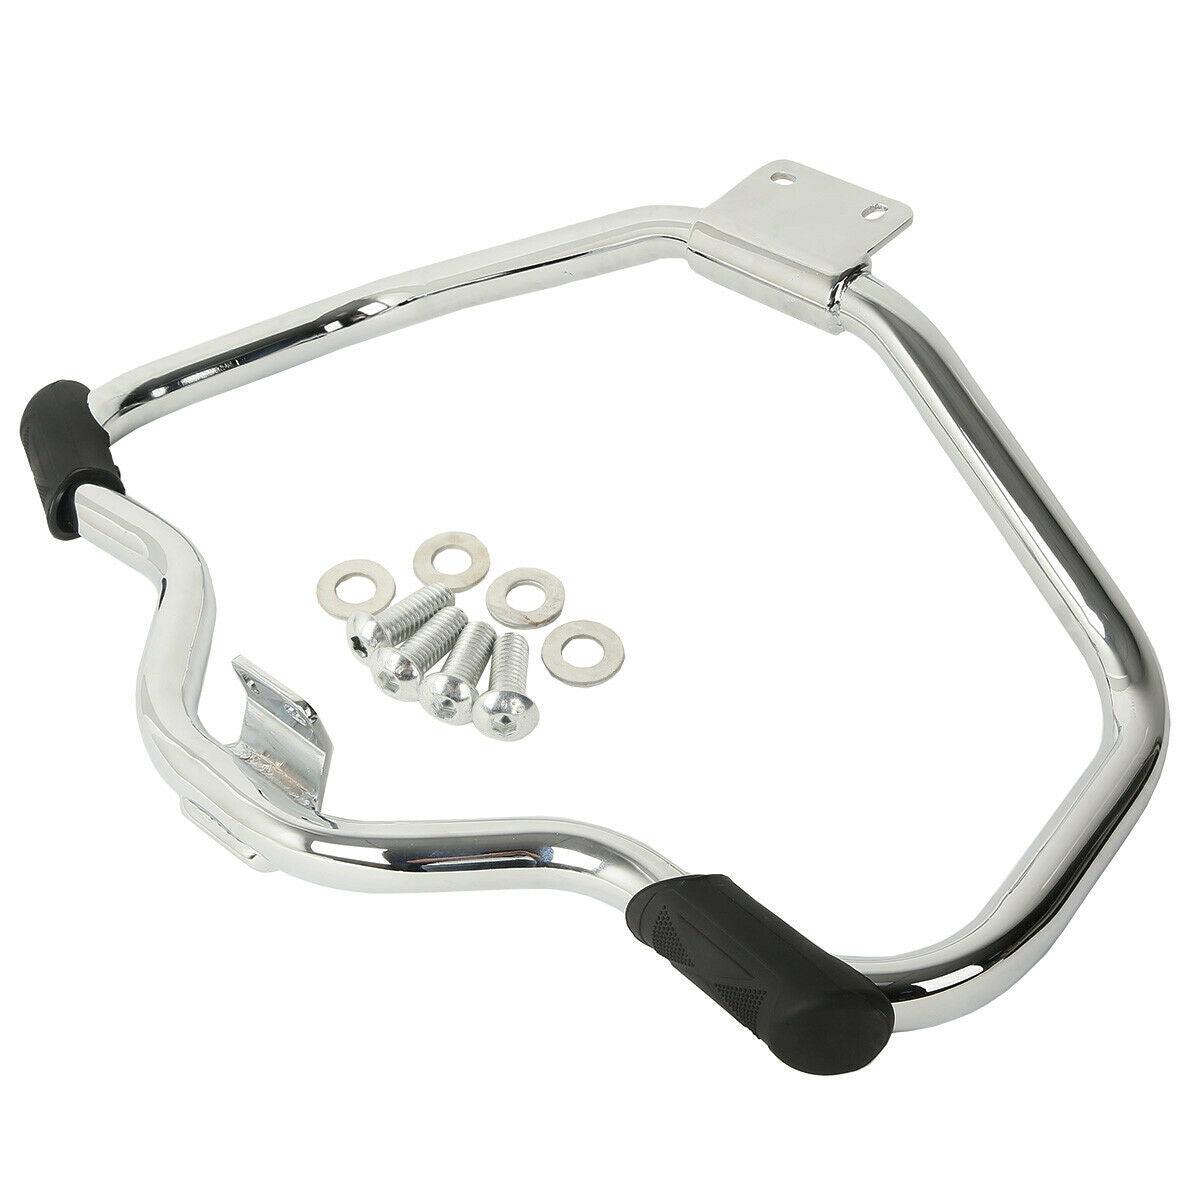 Mustache Engine Guard Highway Crash Bar Fit For Harley Sportster 883 1200 04-21 - Moto Life Products